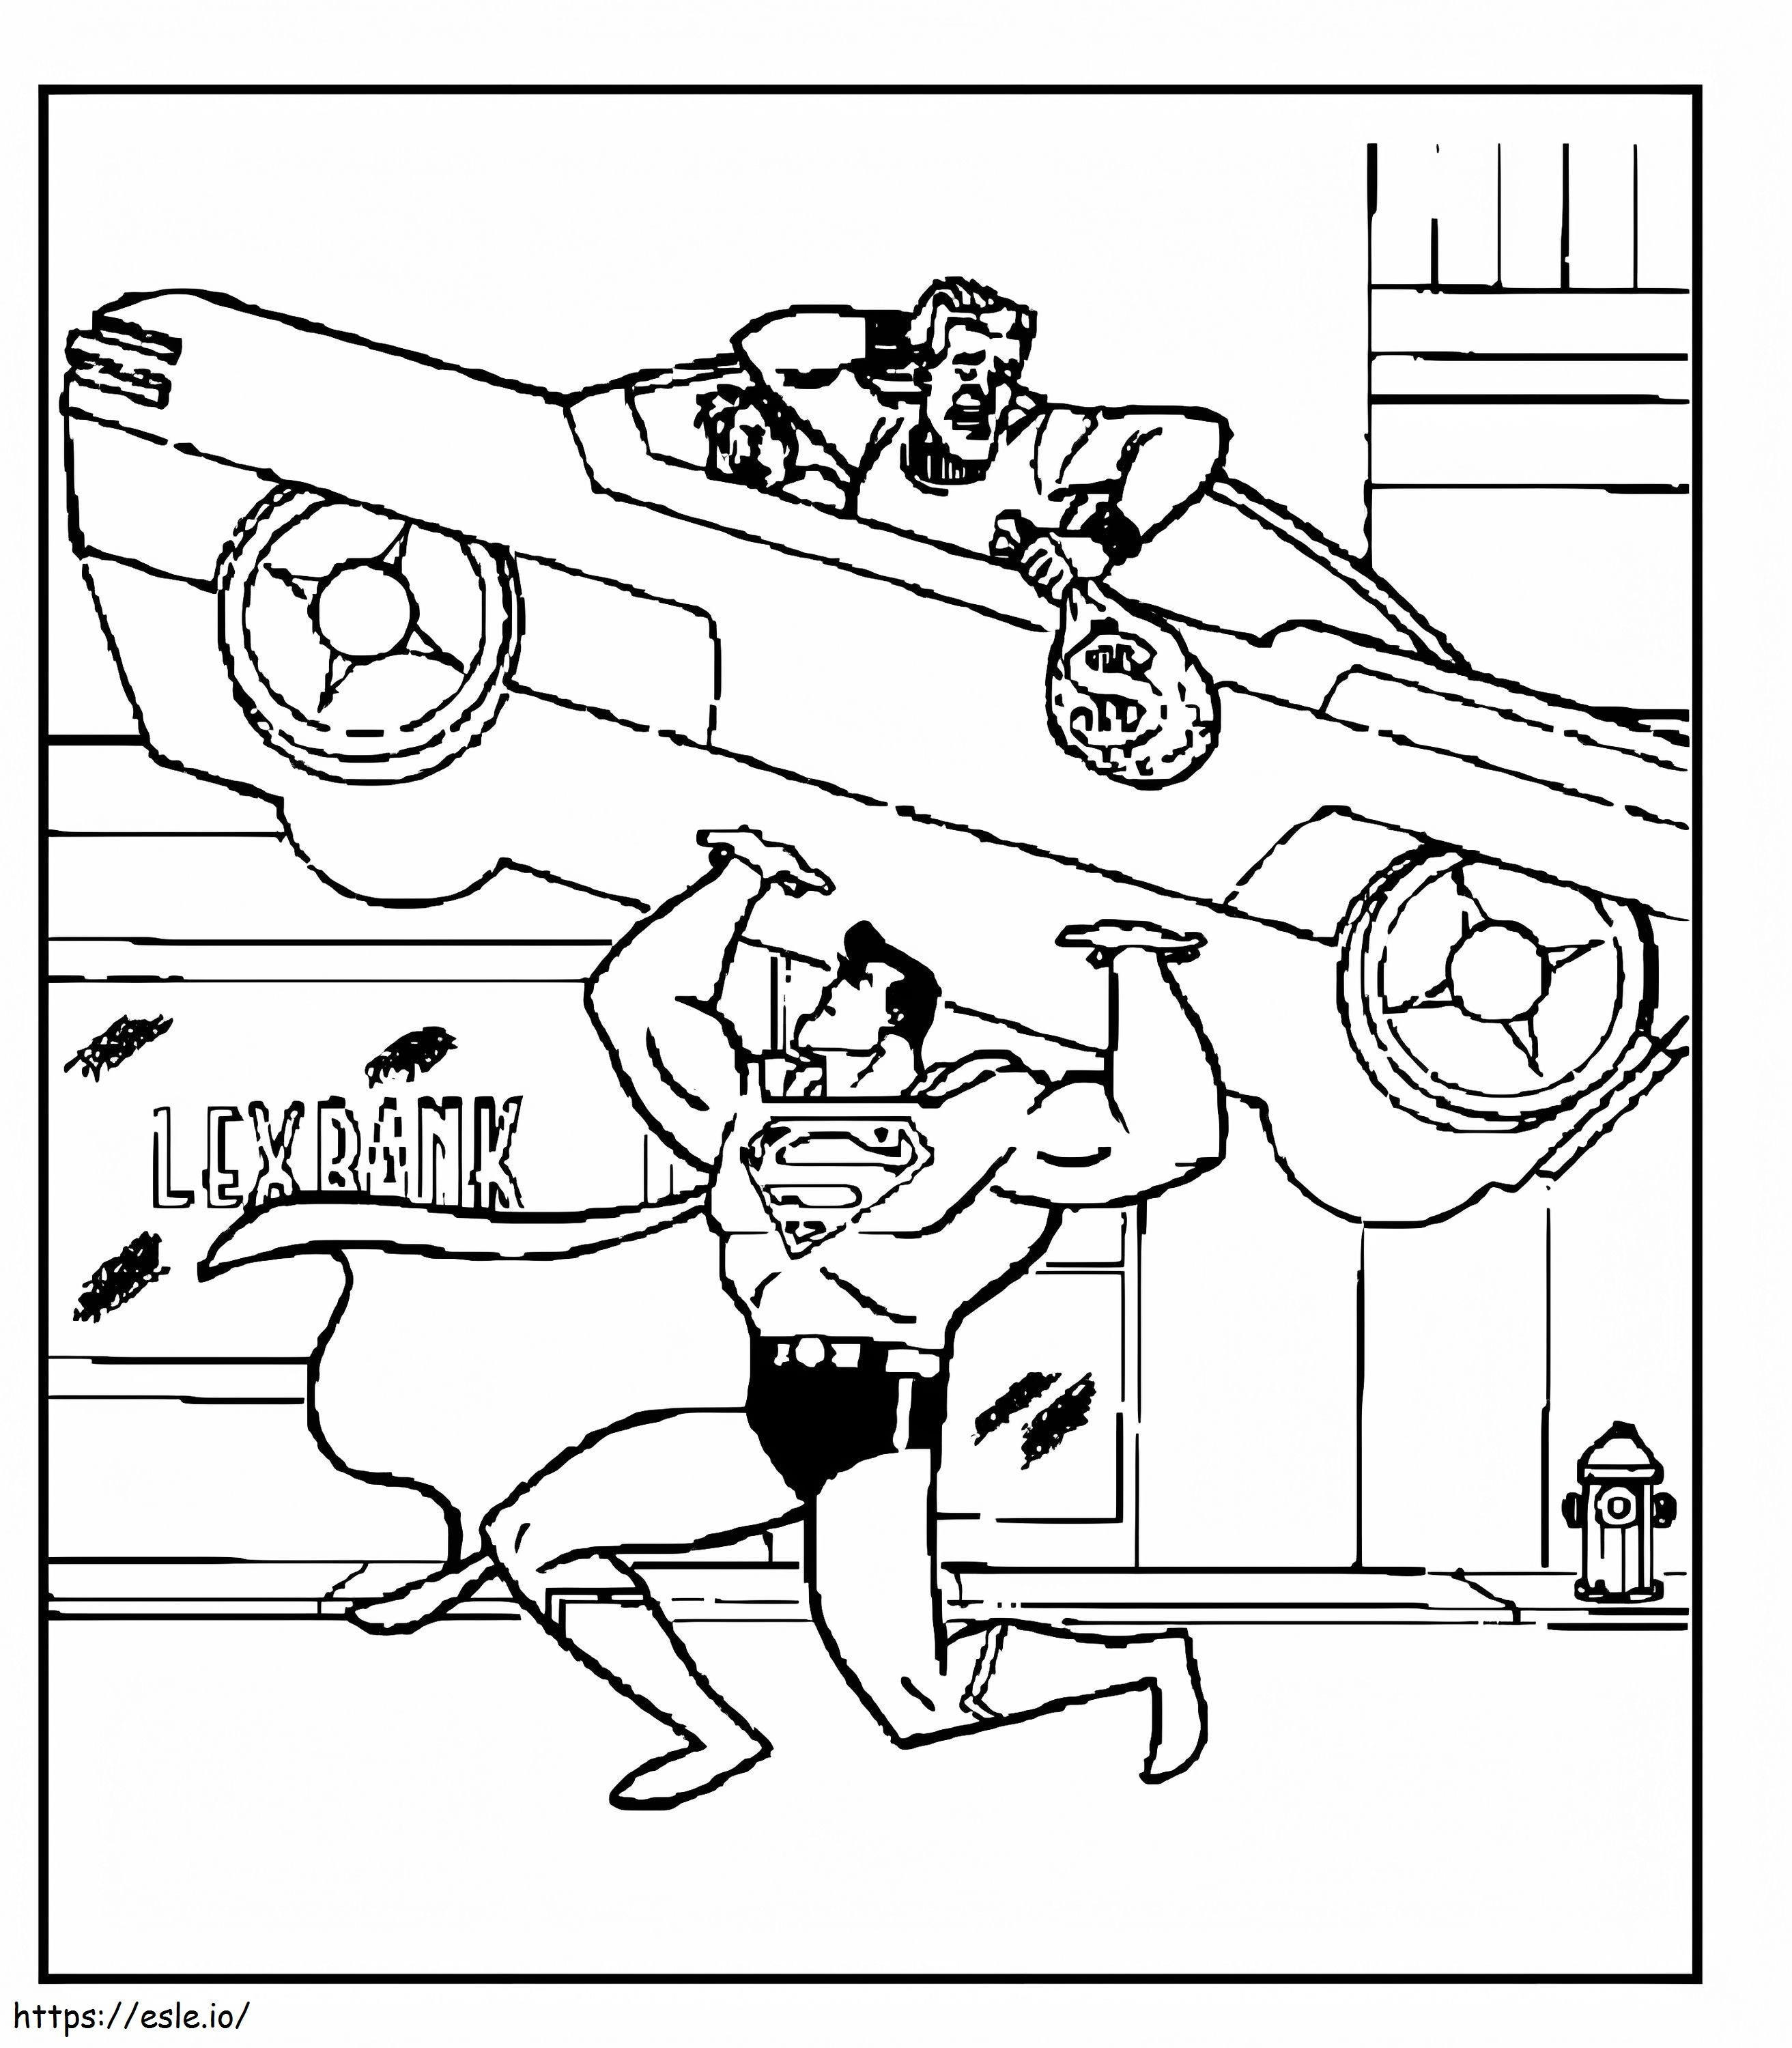 Superman Catching Thief coloring page